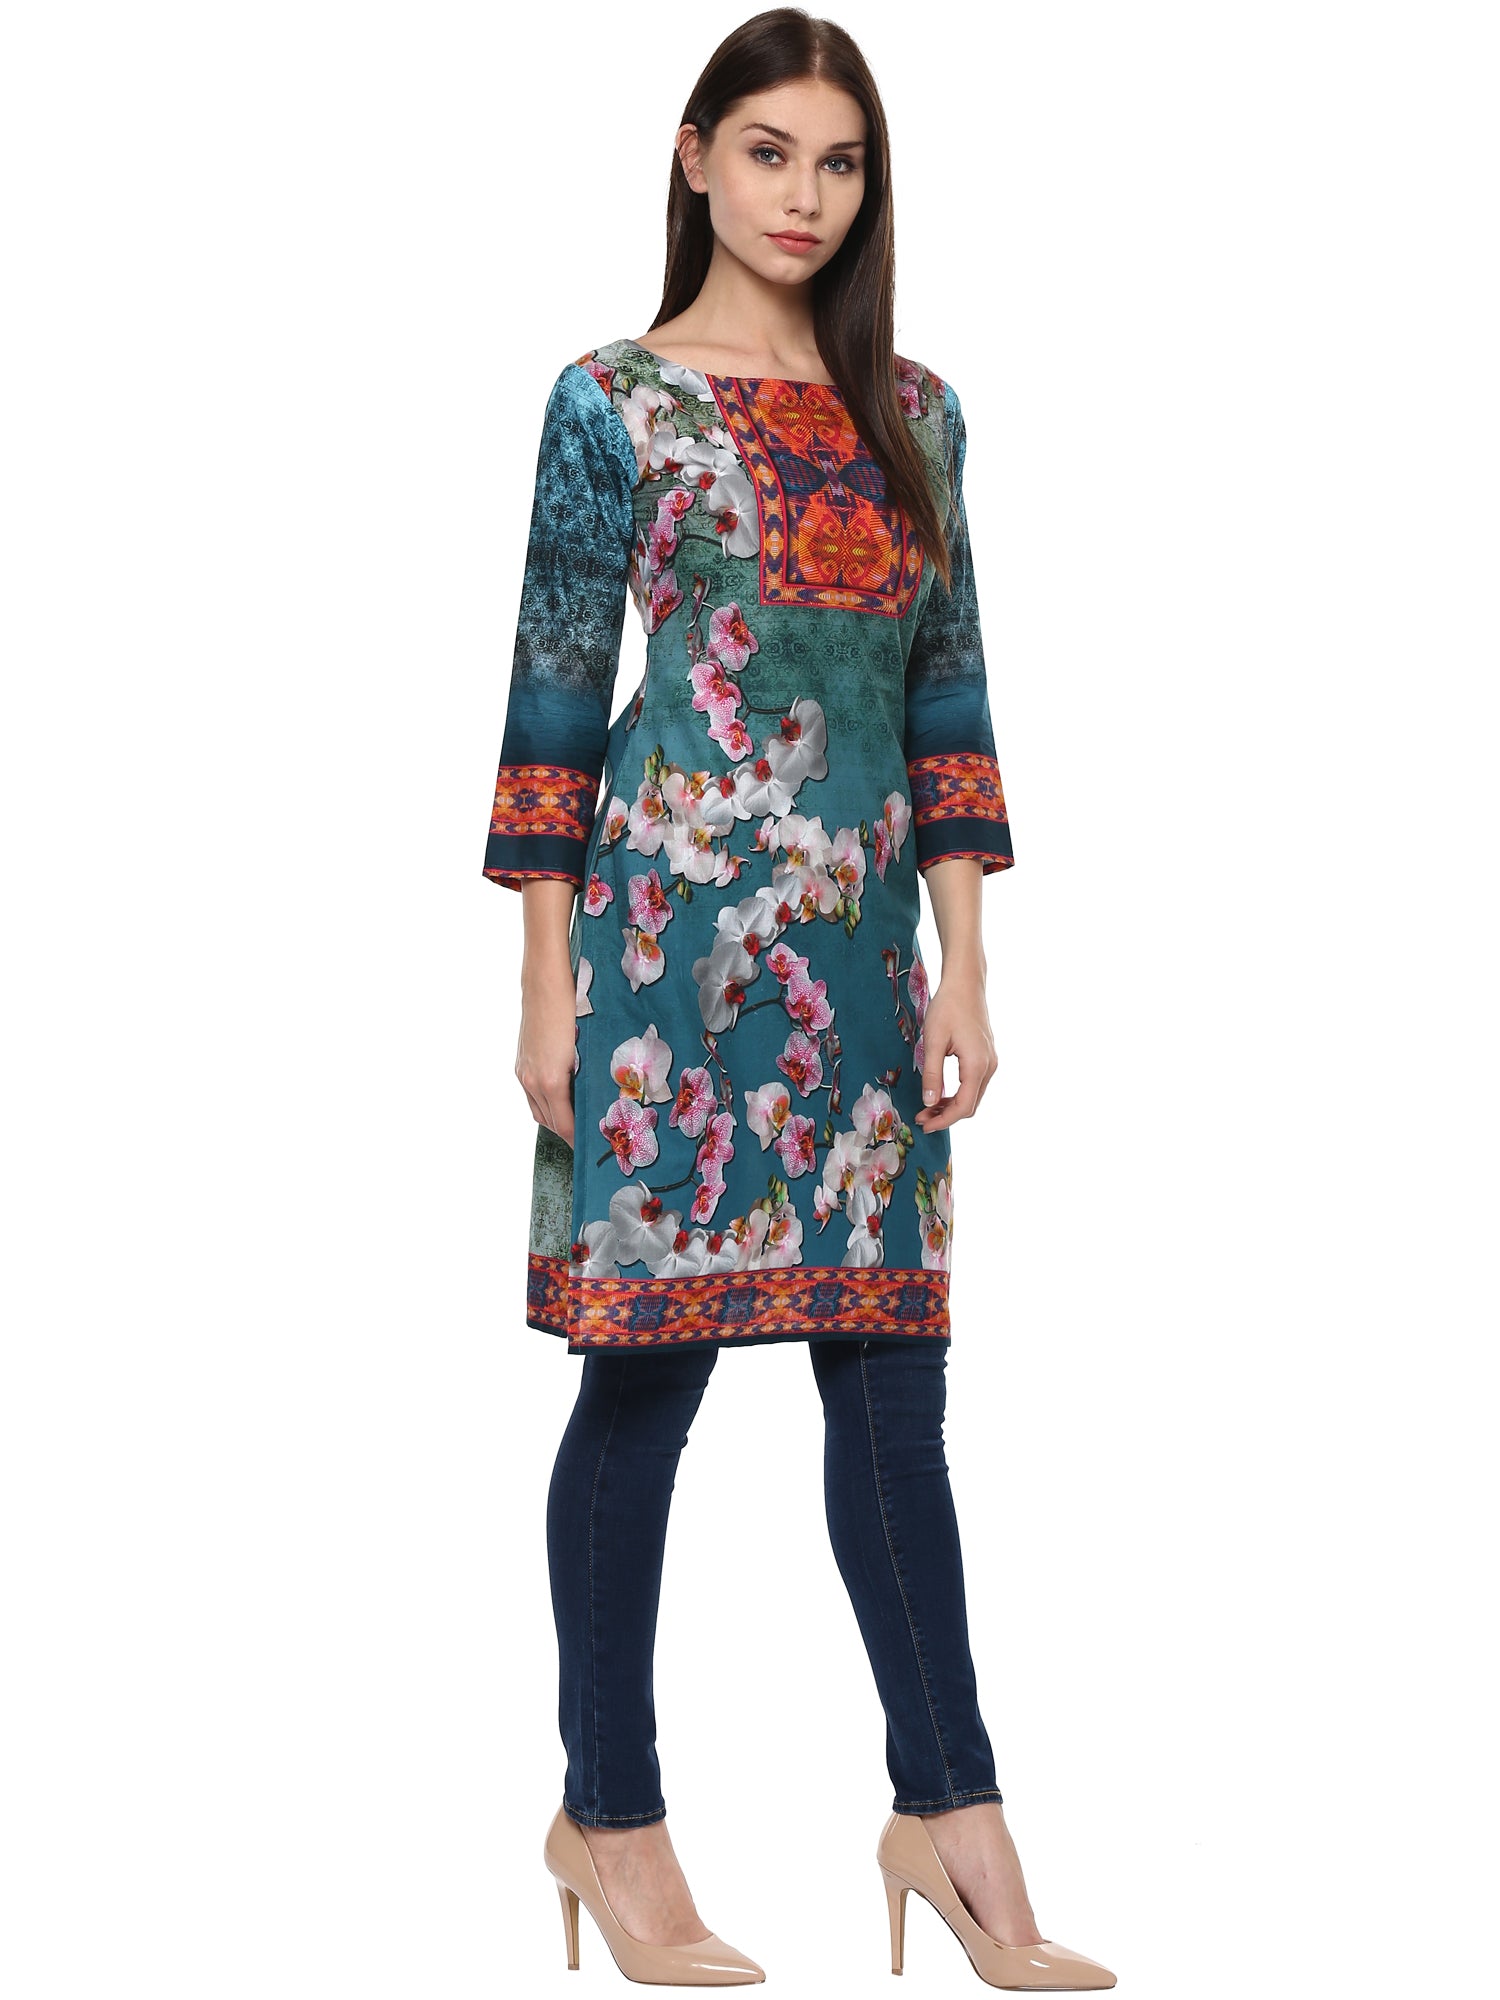 Women's Shades Of Blue Pakistani Style Floral Cotton Only Kurti - Ahalyaa